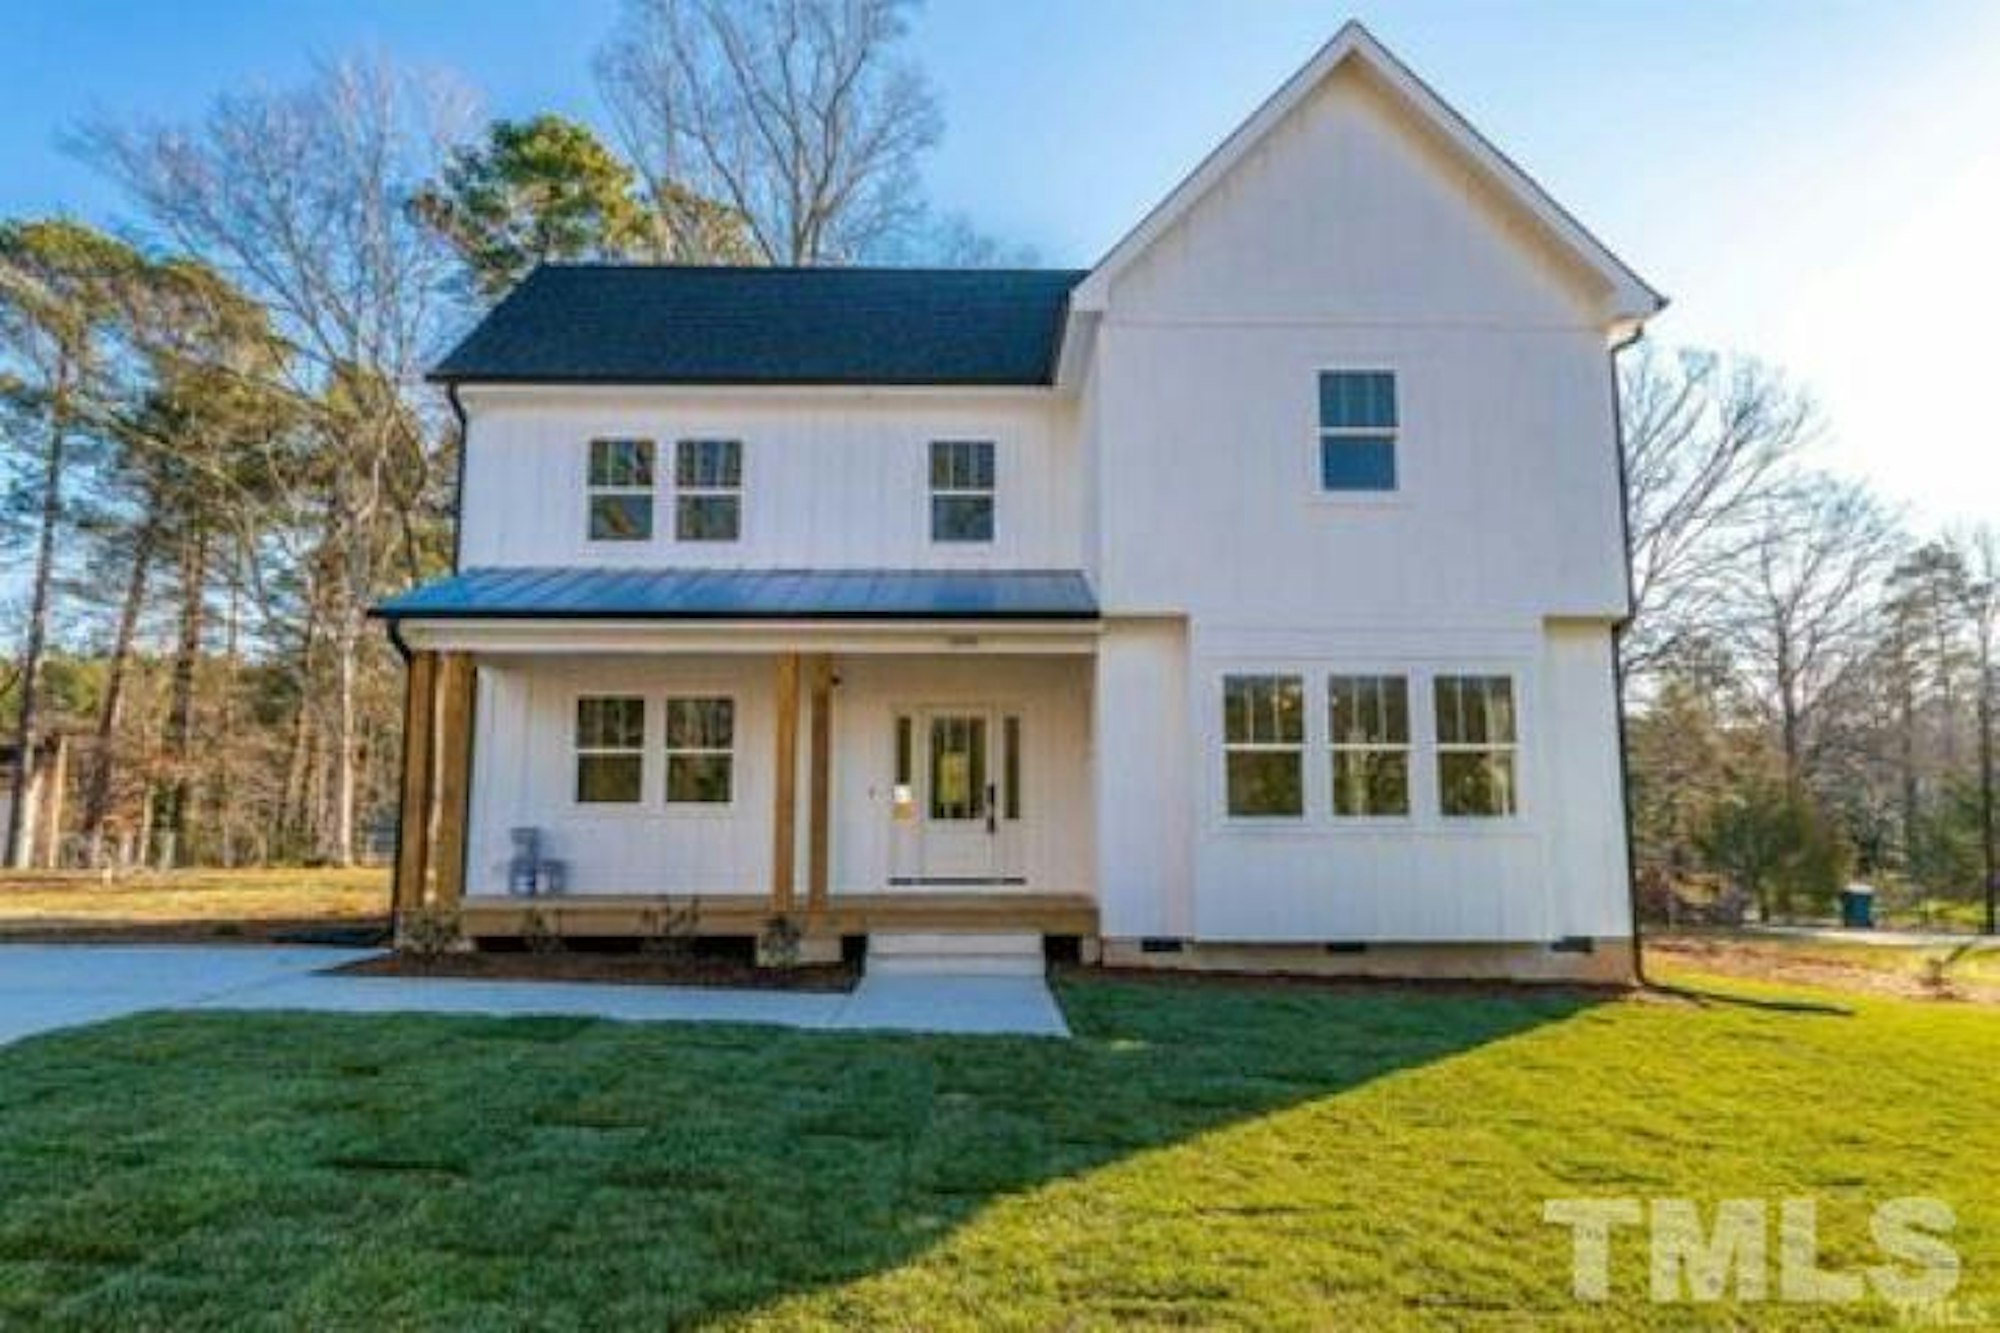 Photo 1 of 51 - 705 Colleton Rd, Raleigh, NC 27610